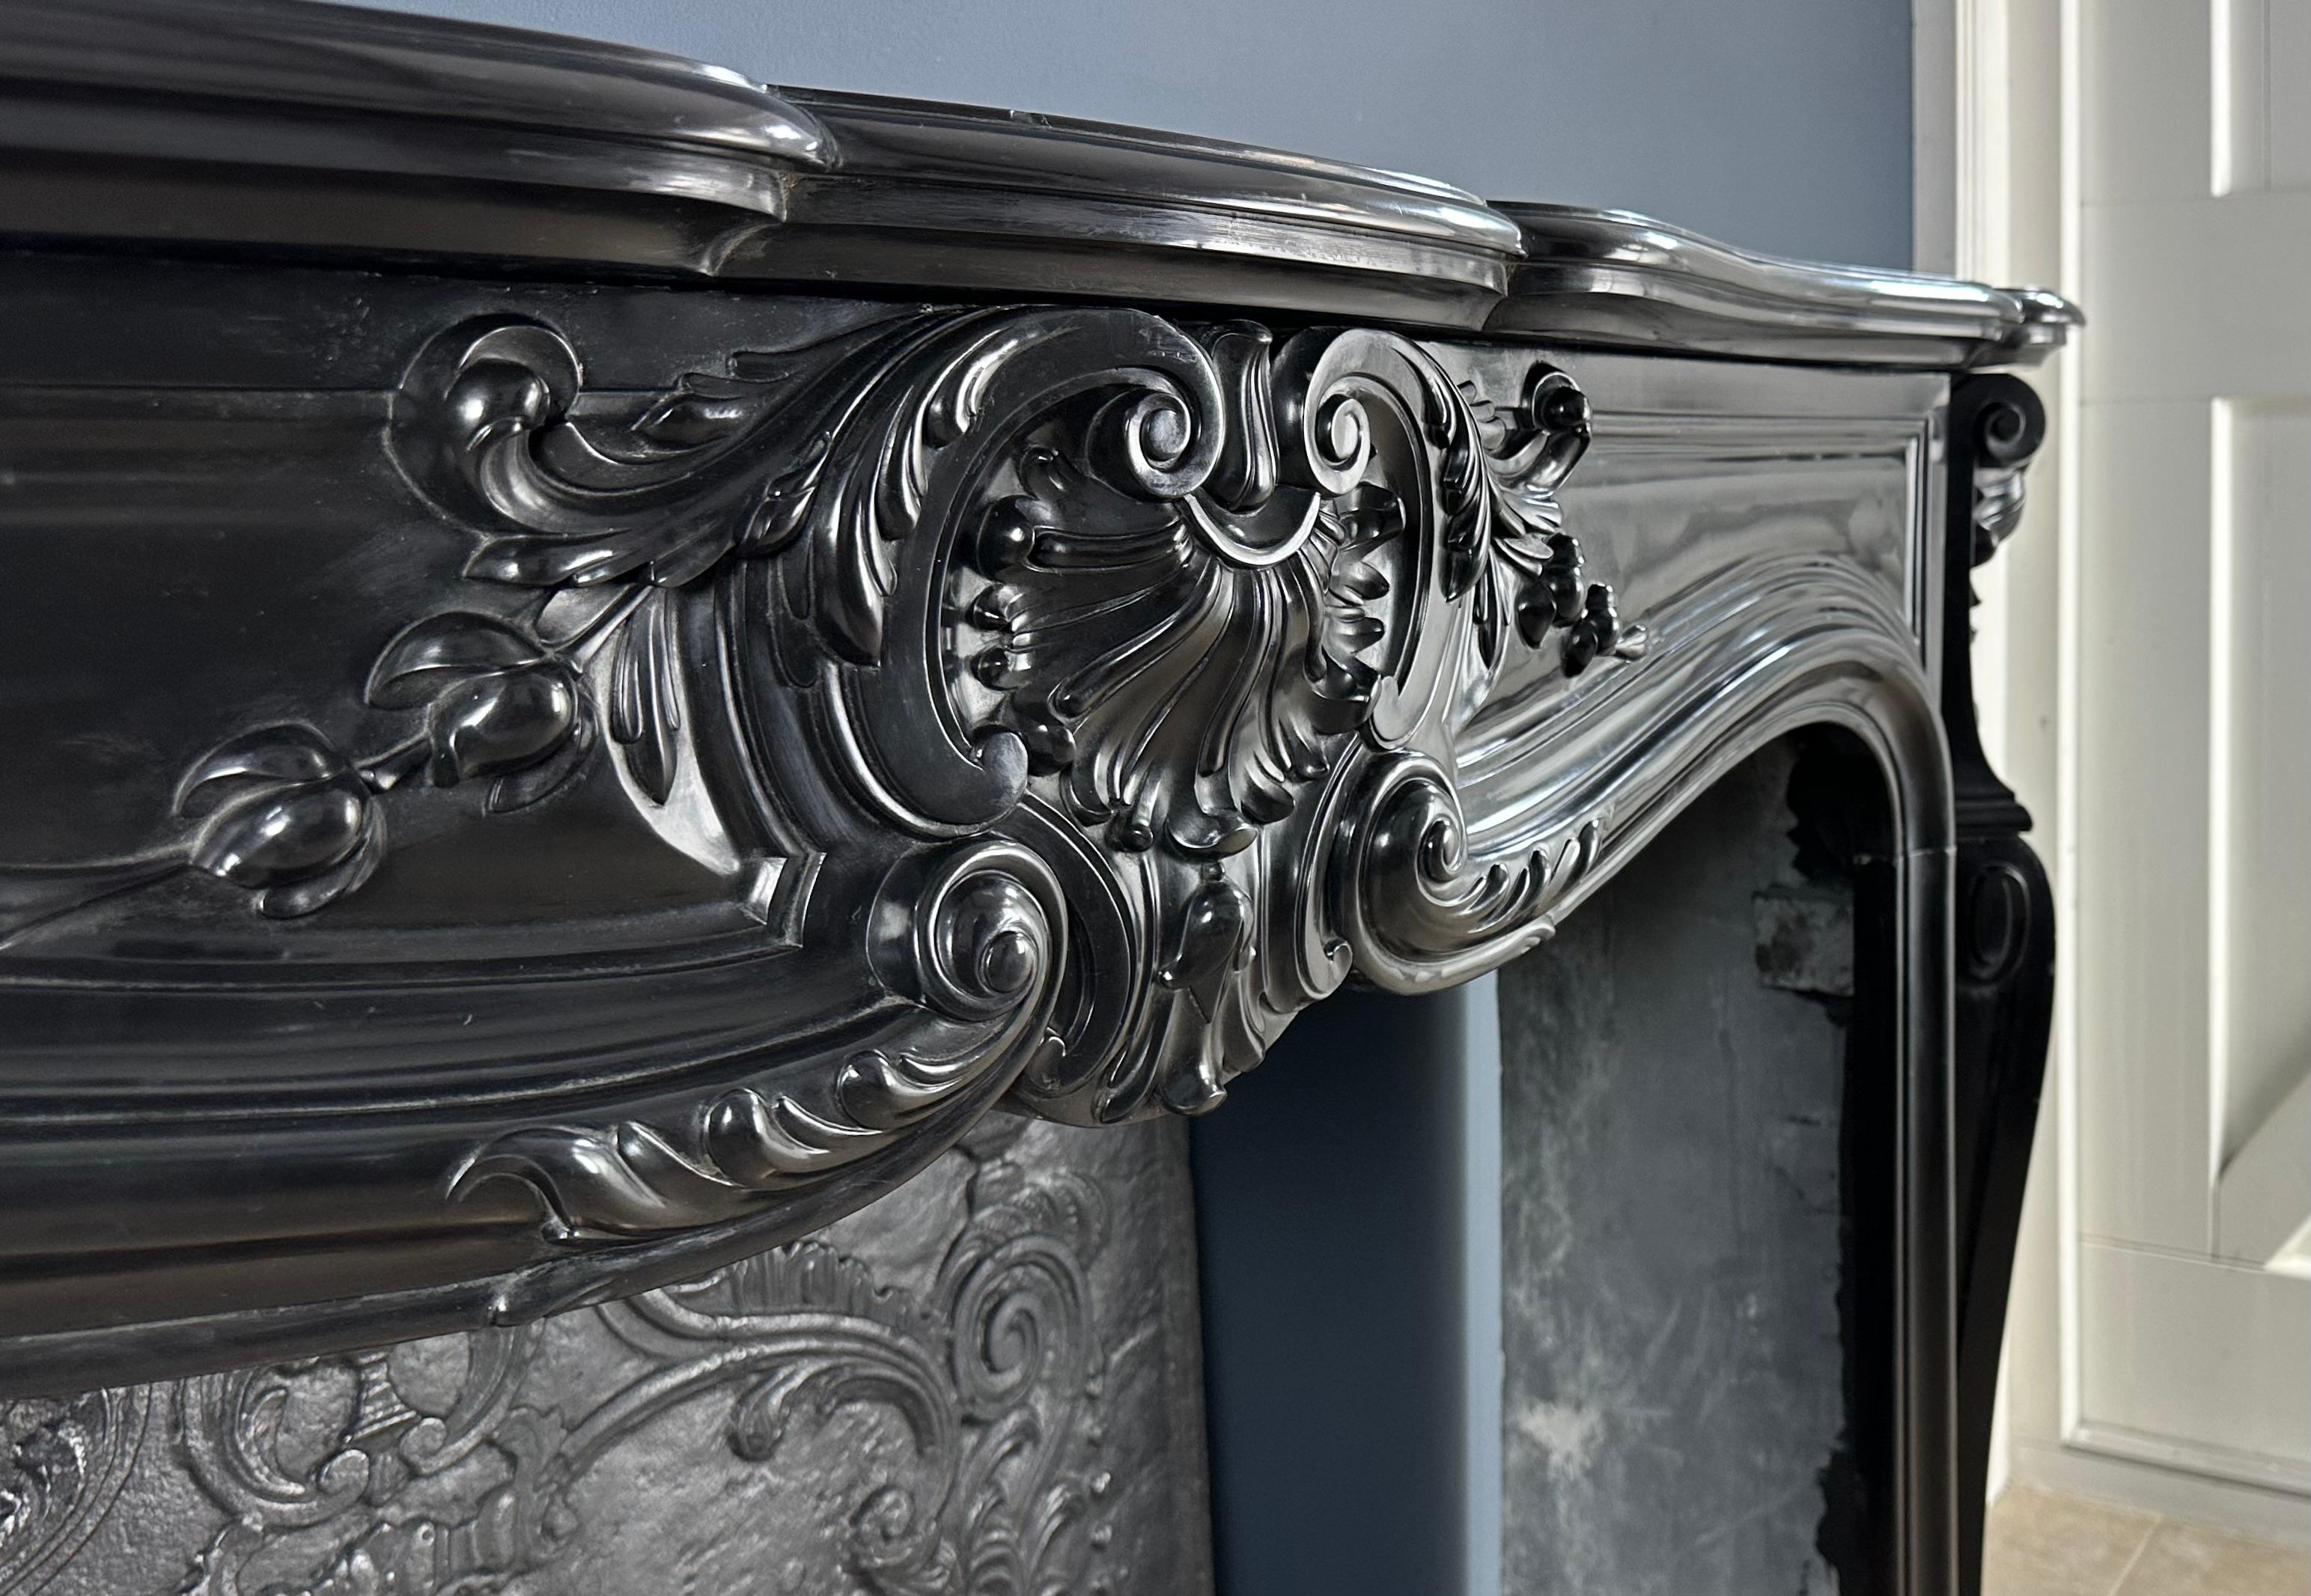 Enter a world of luxury with our unique Louis XV Style Noir de Mazy Antique Marble Front Fireplace. This piece exudes decadence and luxury, and its equal is rare to find. The fireplace is infused with richly detailed ornamentation, including